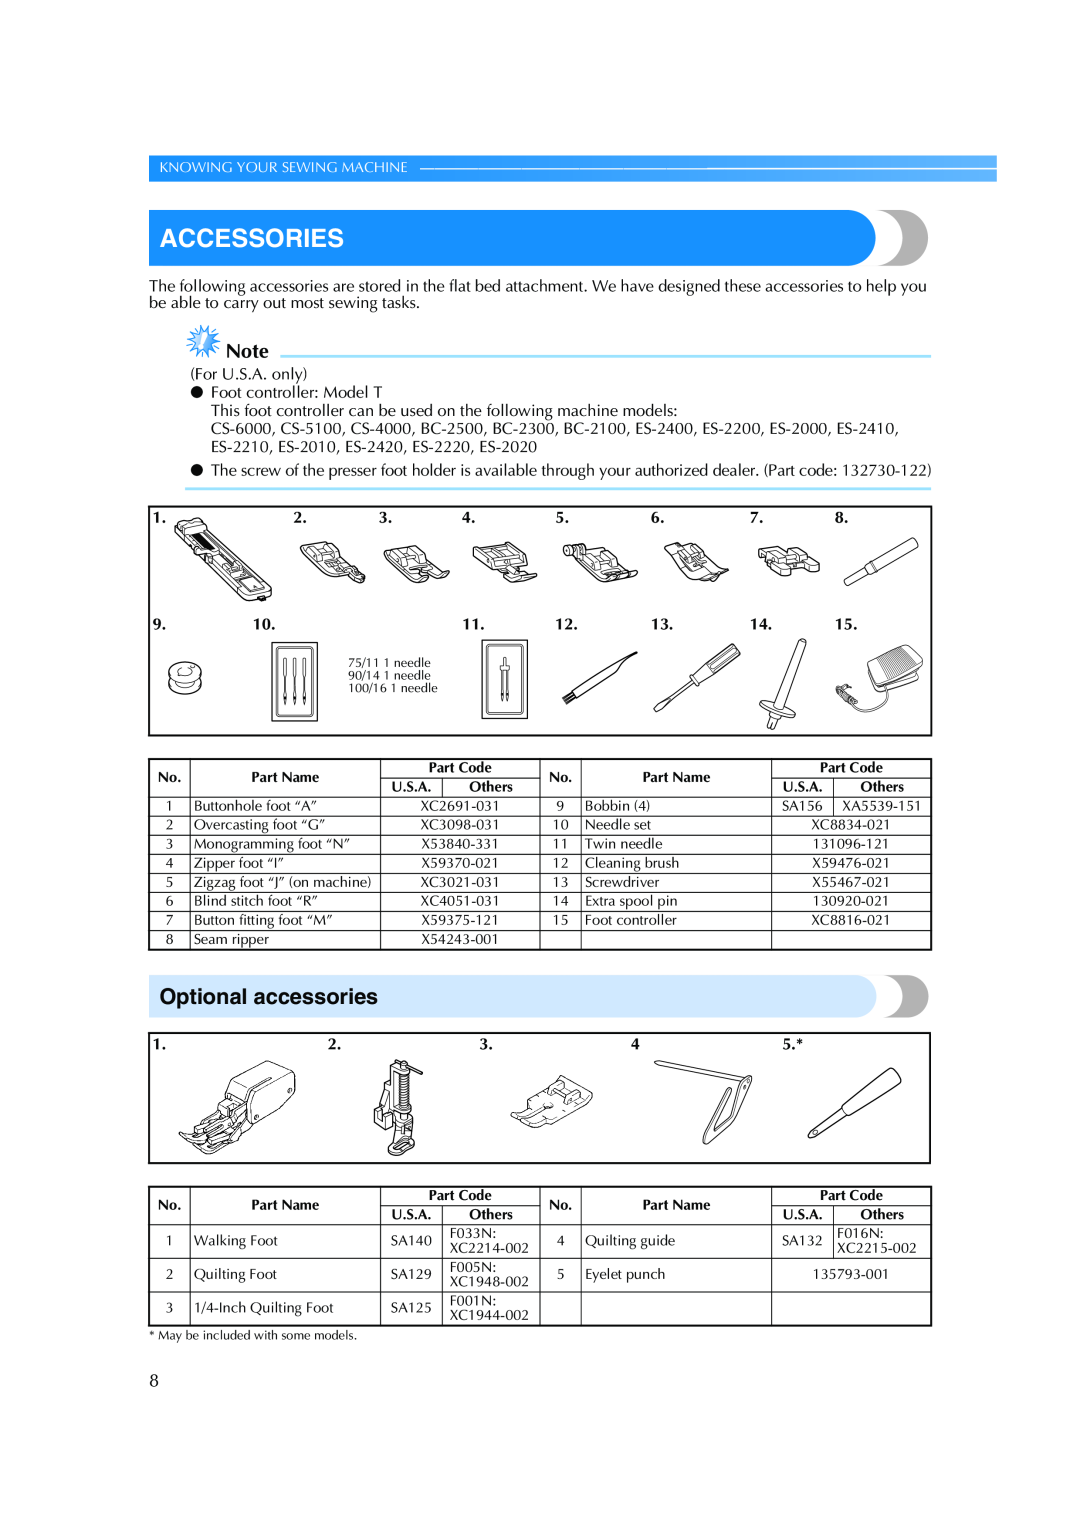 Brother ES 2000 operation manual Accessories, Optional accessories 